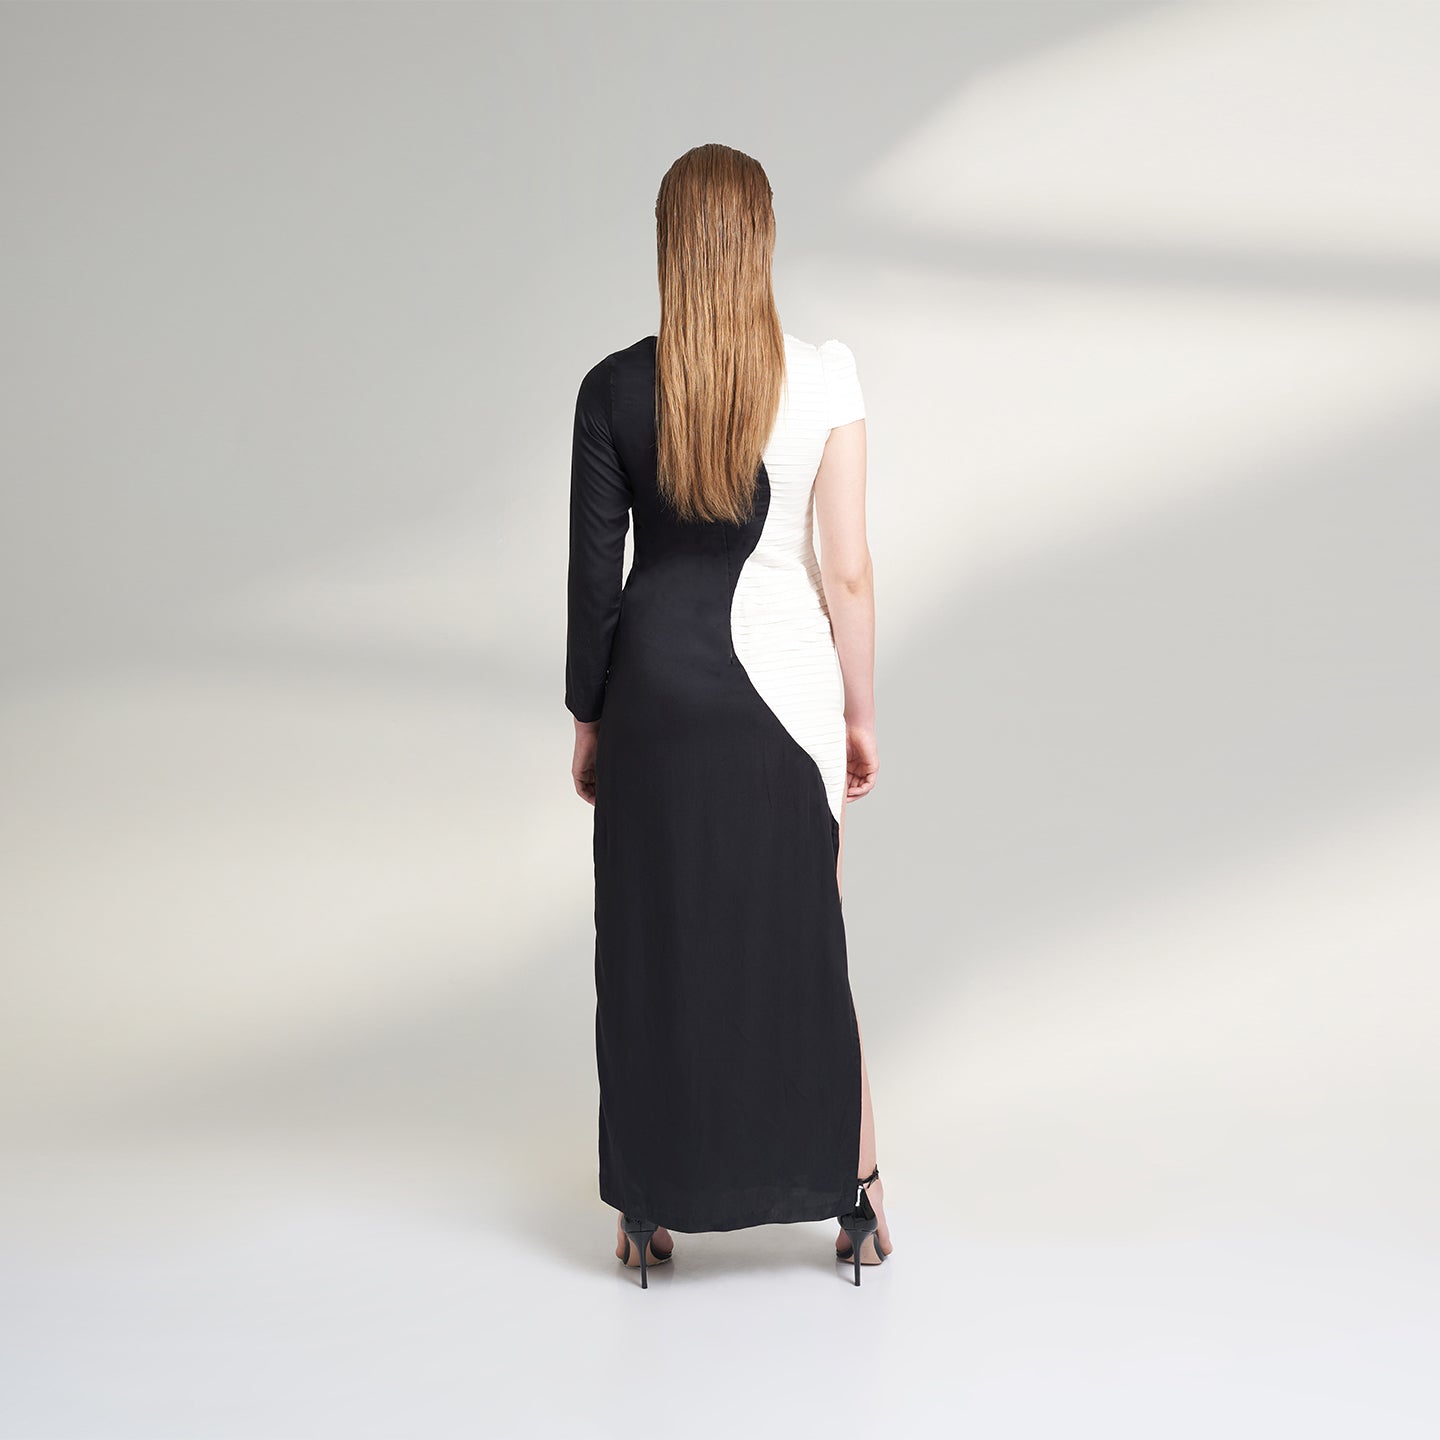 A medium size model wearing a black and white half and half dress made from organic lotus stem fabric. This sustainable vegan dress is a long floor length dress with one side pleated in white and one side plain black with a thigh high side slit striking a back pose.